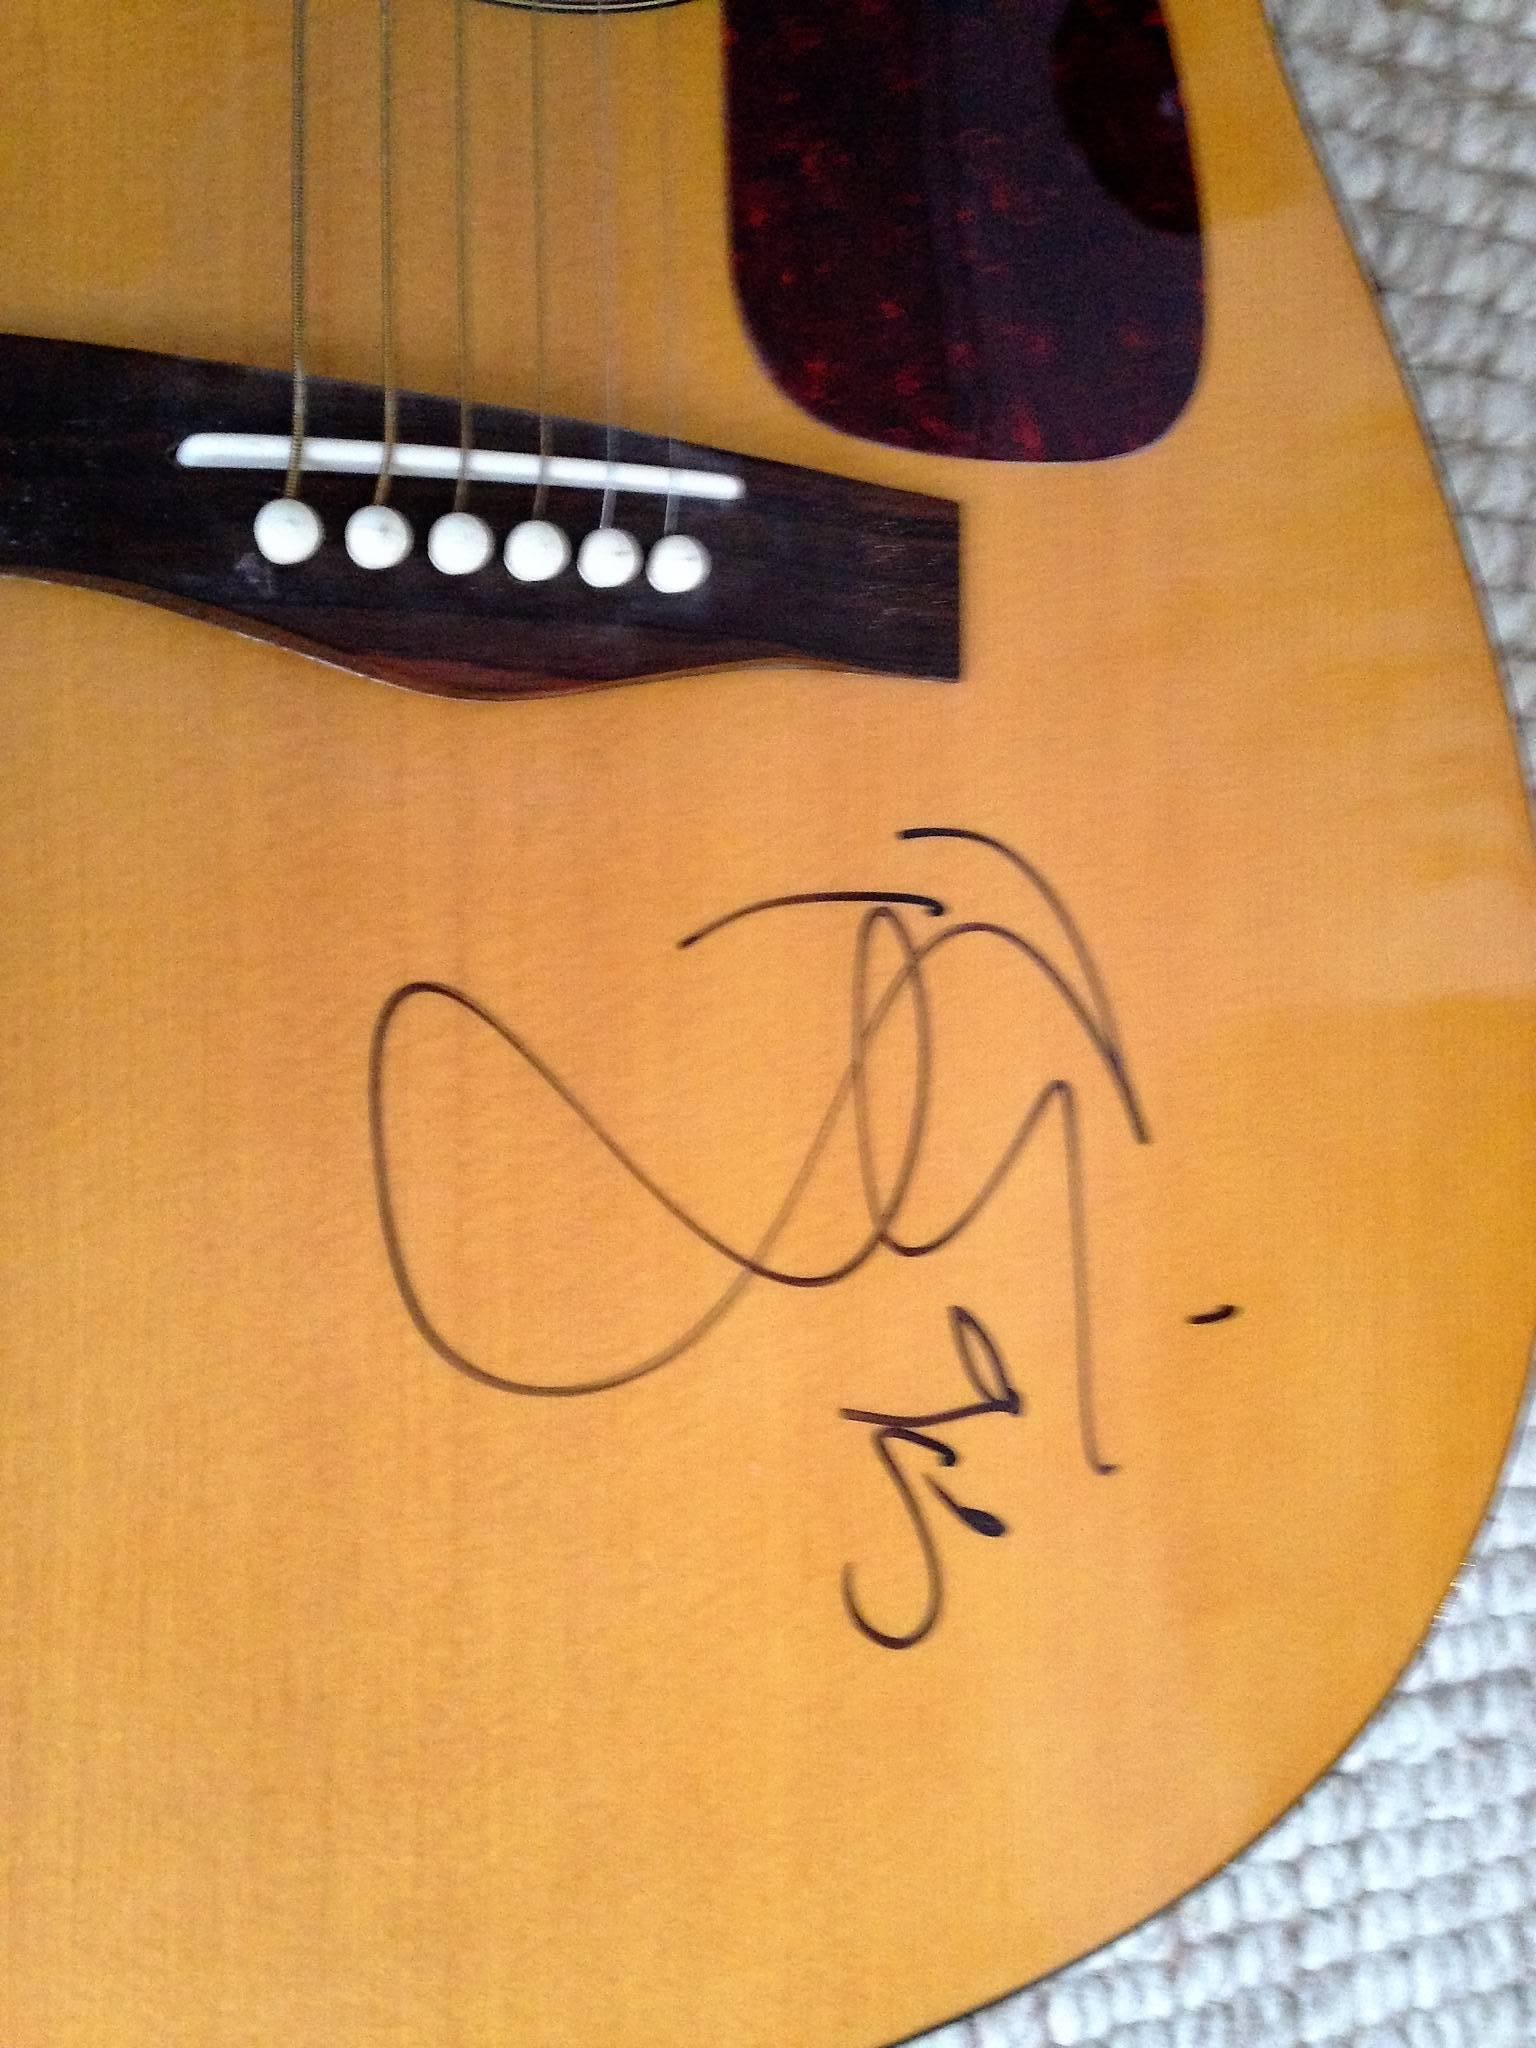 This Fender model 200Sx guitar is handsigned by David Bowie in 1995. He signed his name and dated it 95. This Fender guitar was manufactured in Indonesia. This autograph was obtained in person by the seller. There are some slight abrasions to the